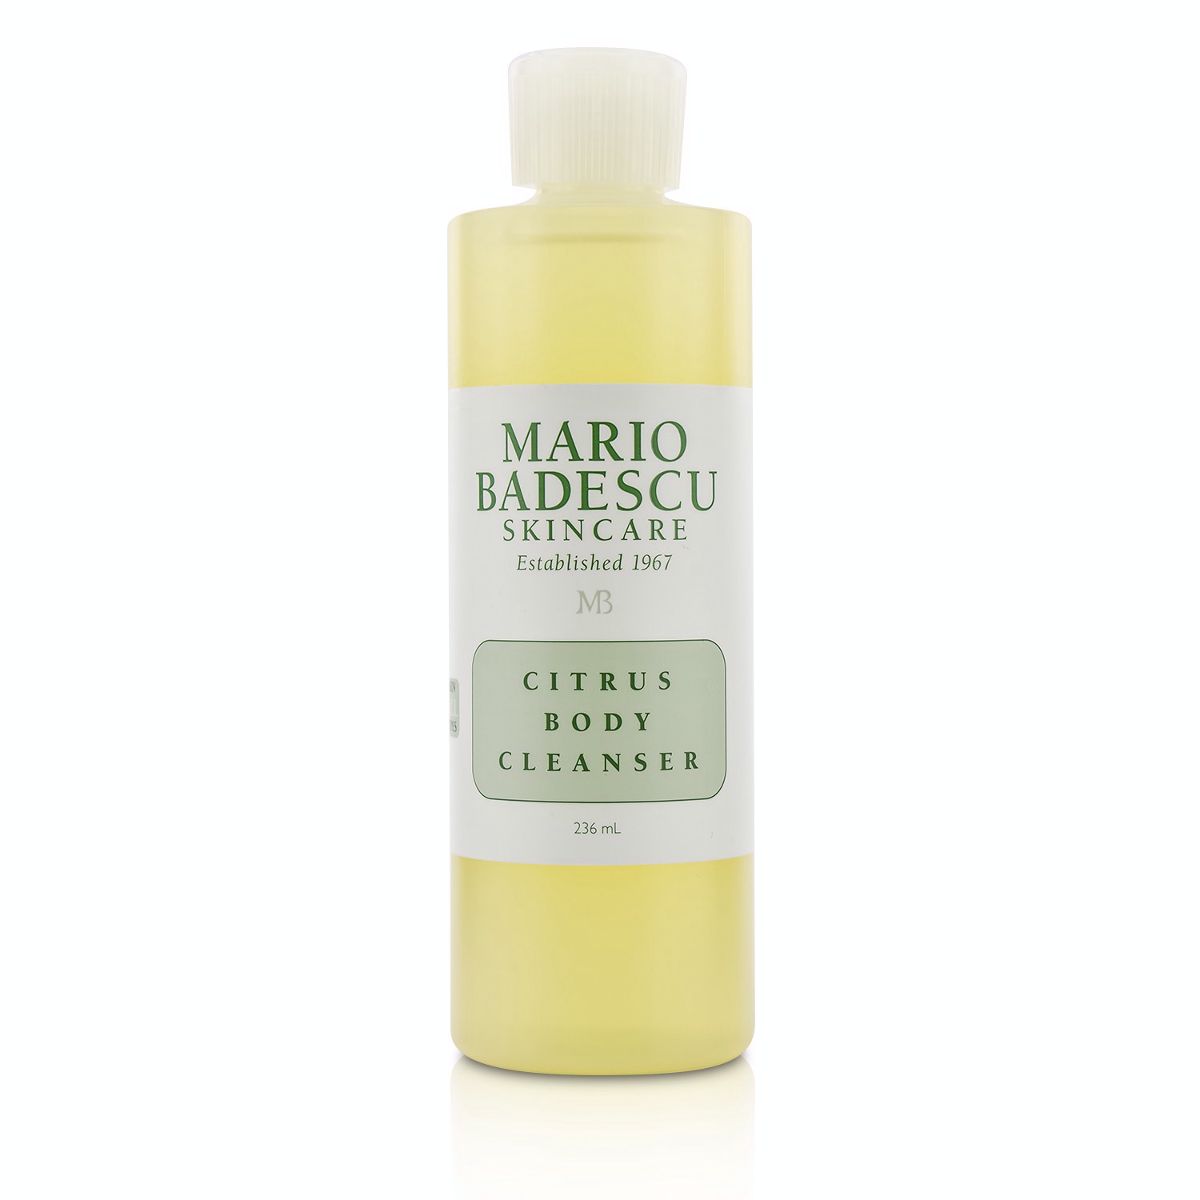 Citrus Body Cleanser - For All Skin Types Mario Badescu Image